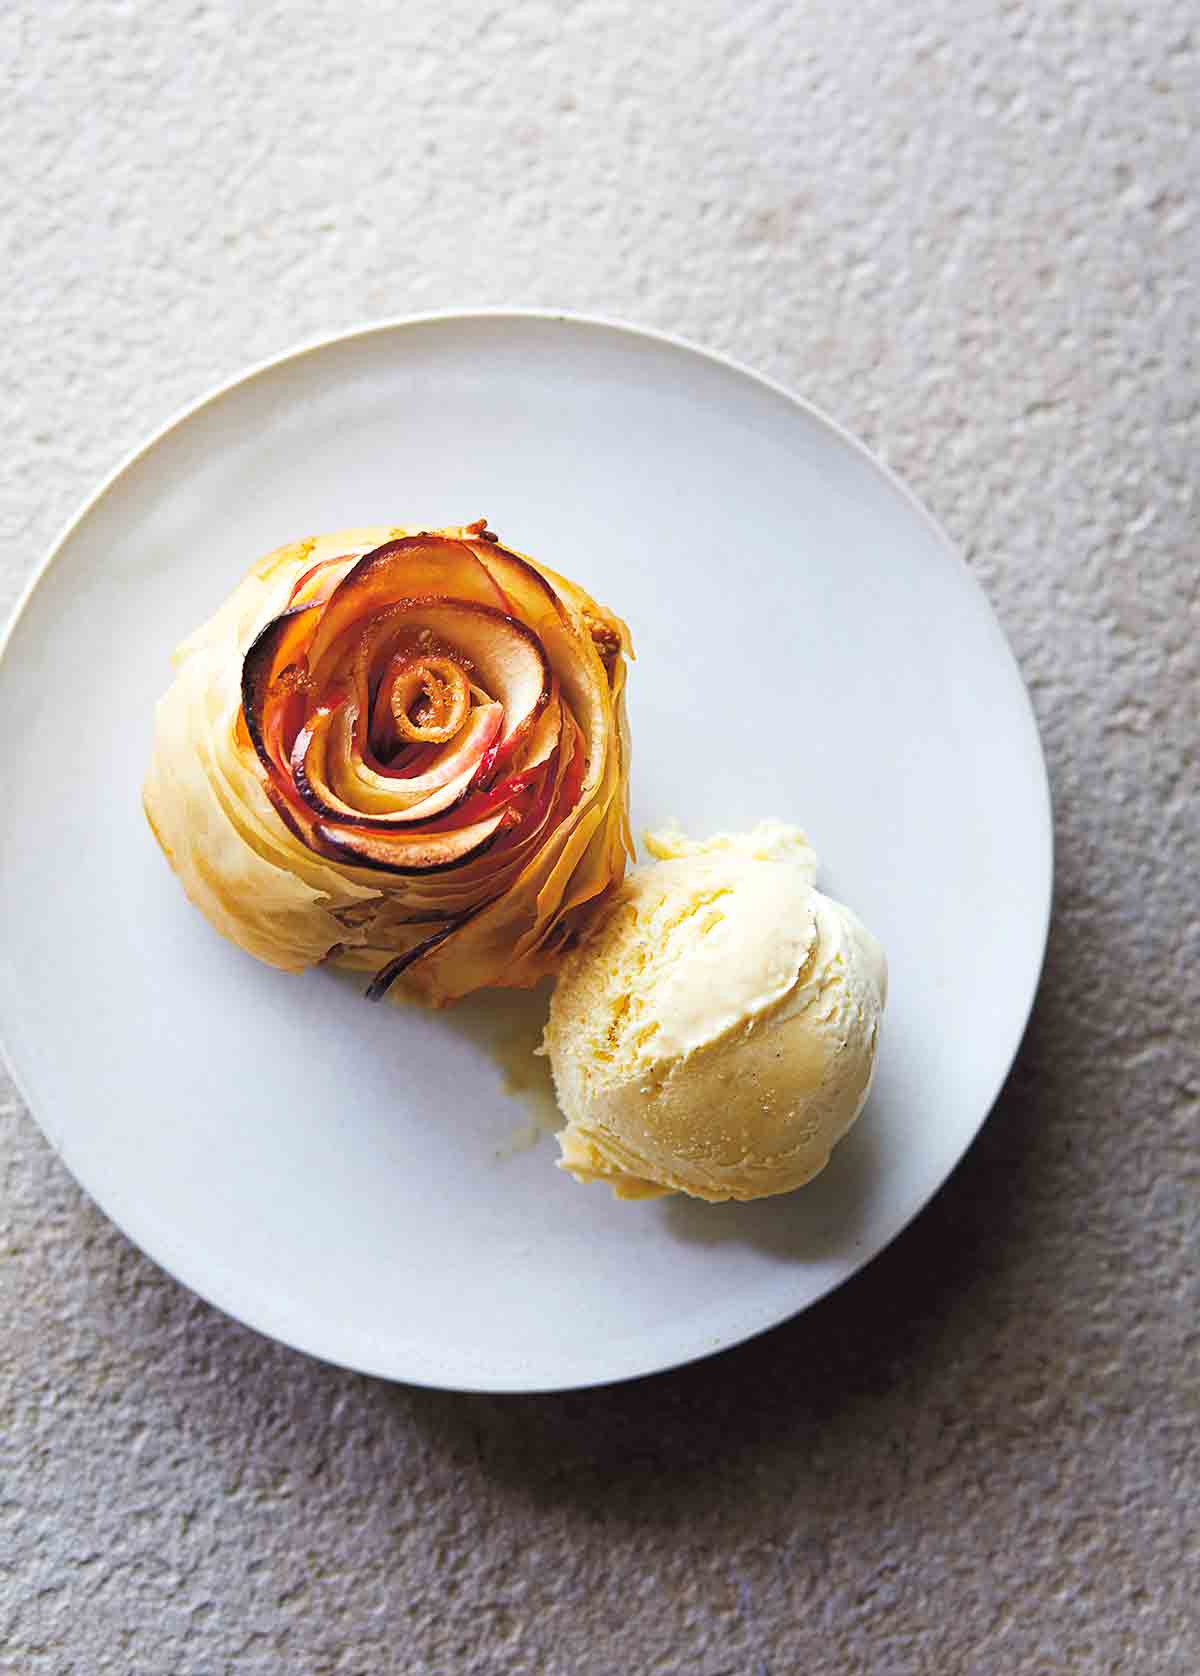 An apple rose tart, shaped to look like a rose with a scoop of ice cream beside it on a white plate.